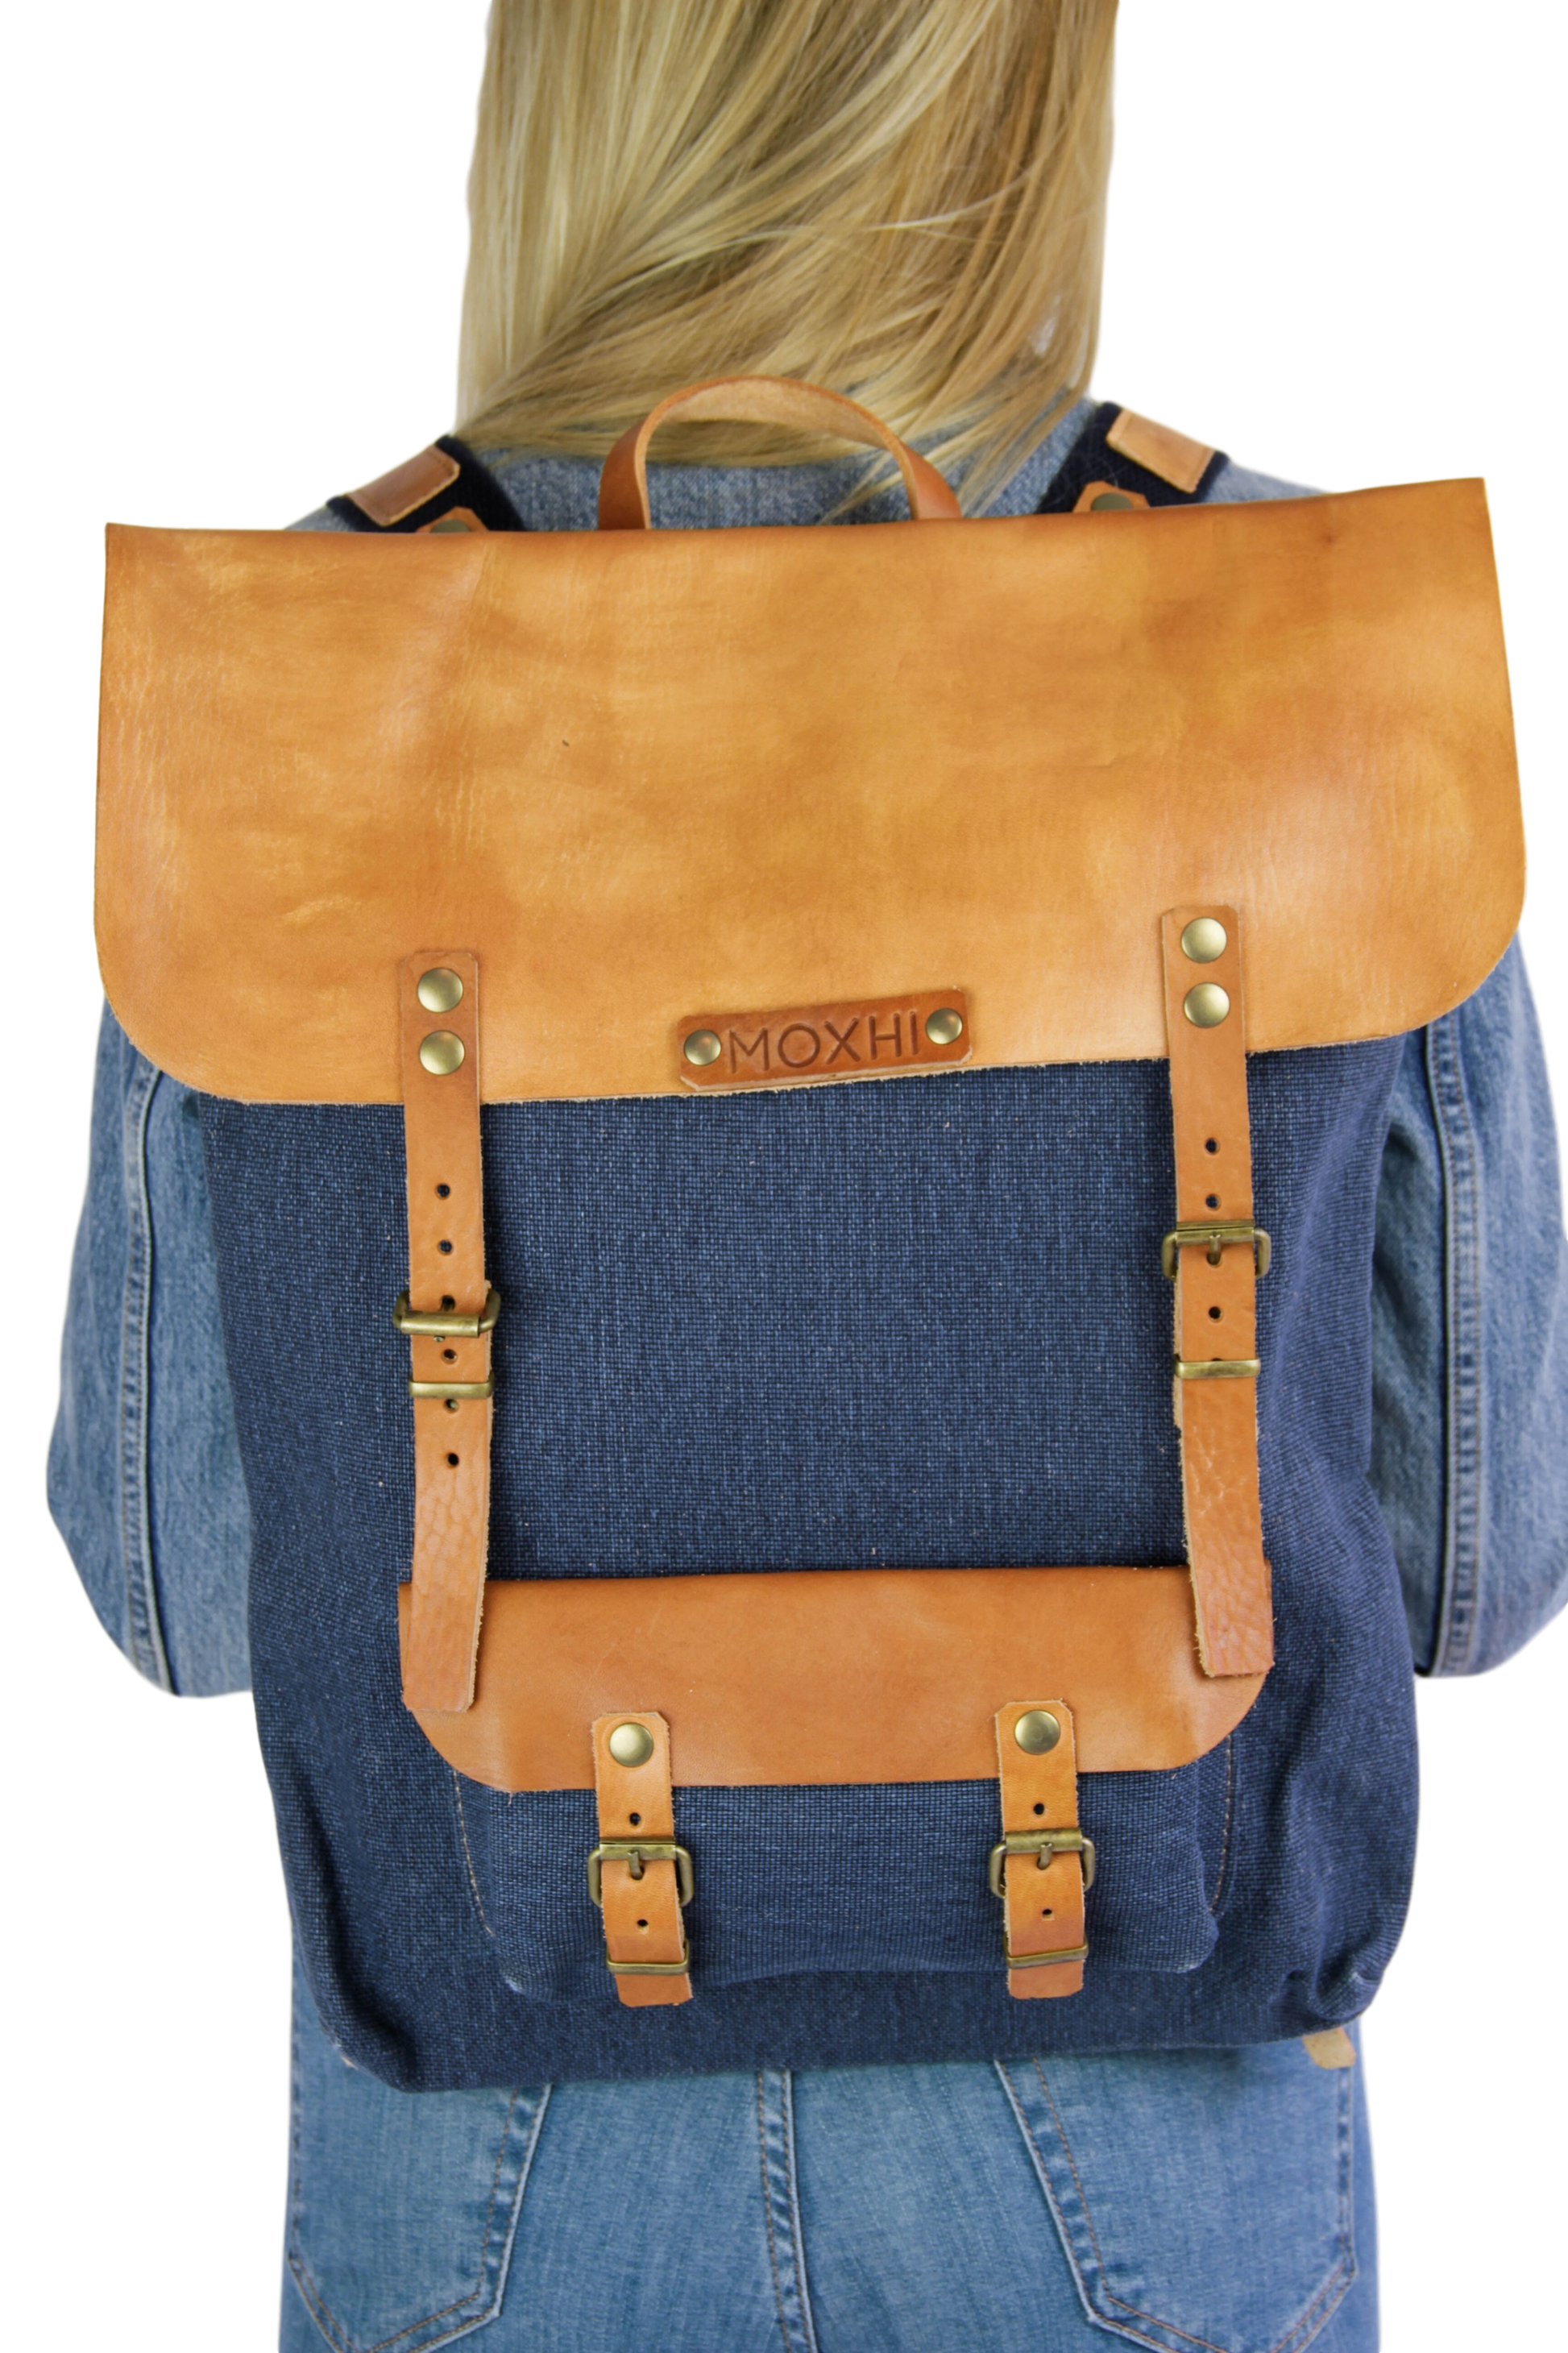 Artisanal handcrafted backpack sustainable